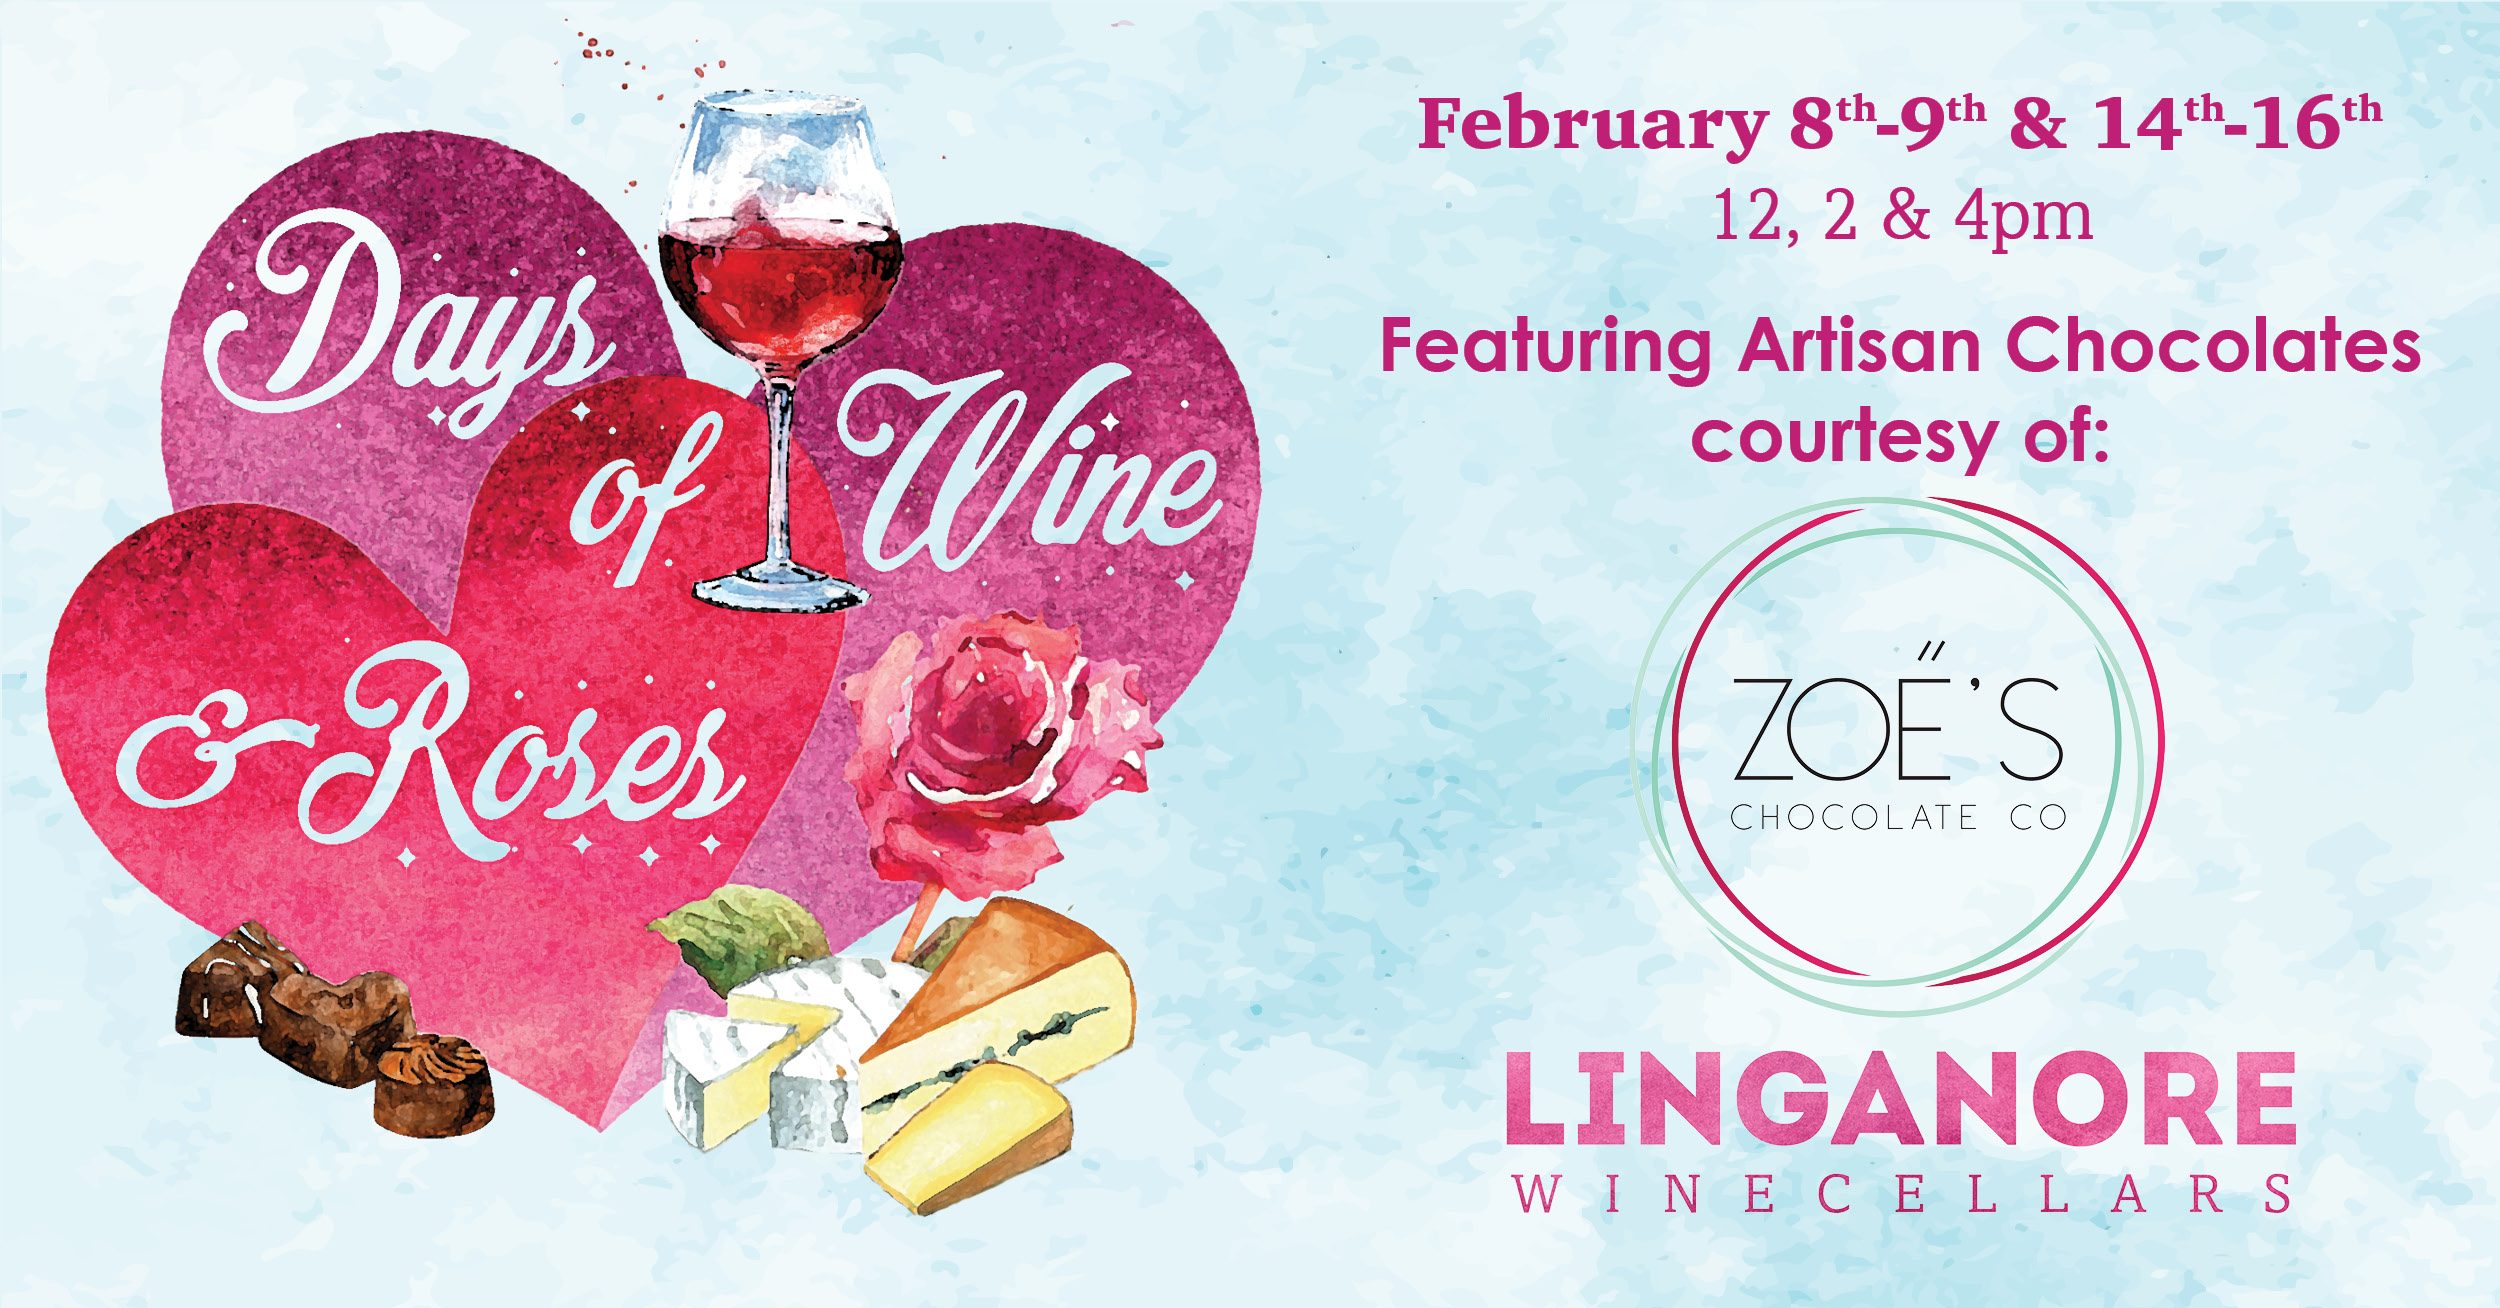 days of wine and roses announcement with zoes chocolate co